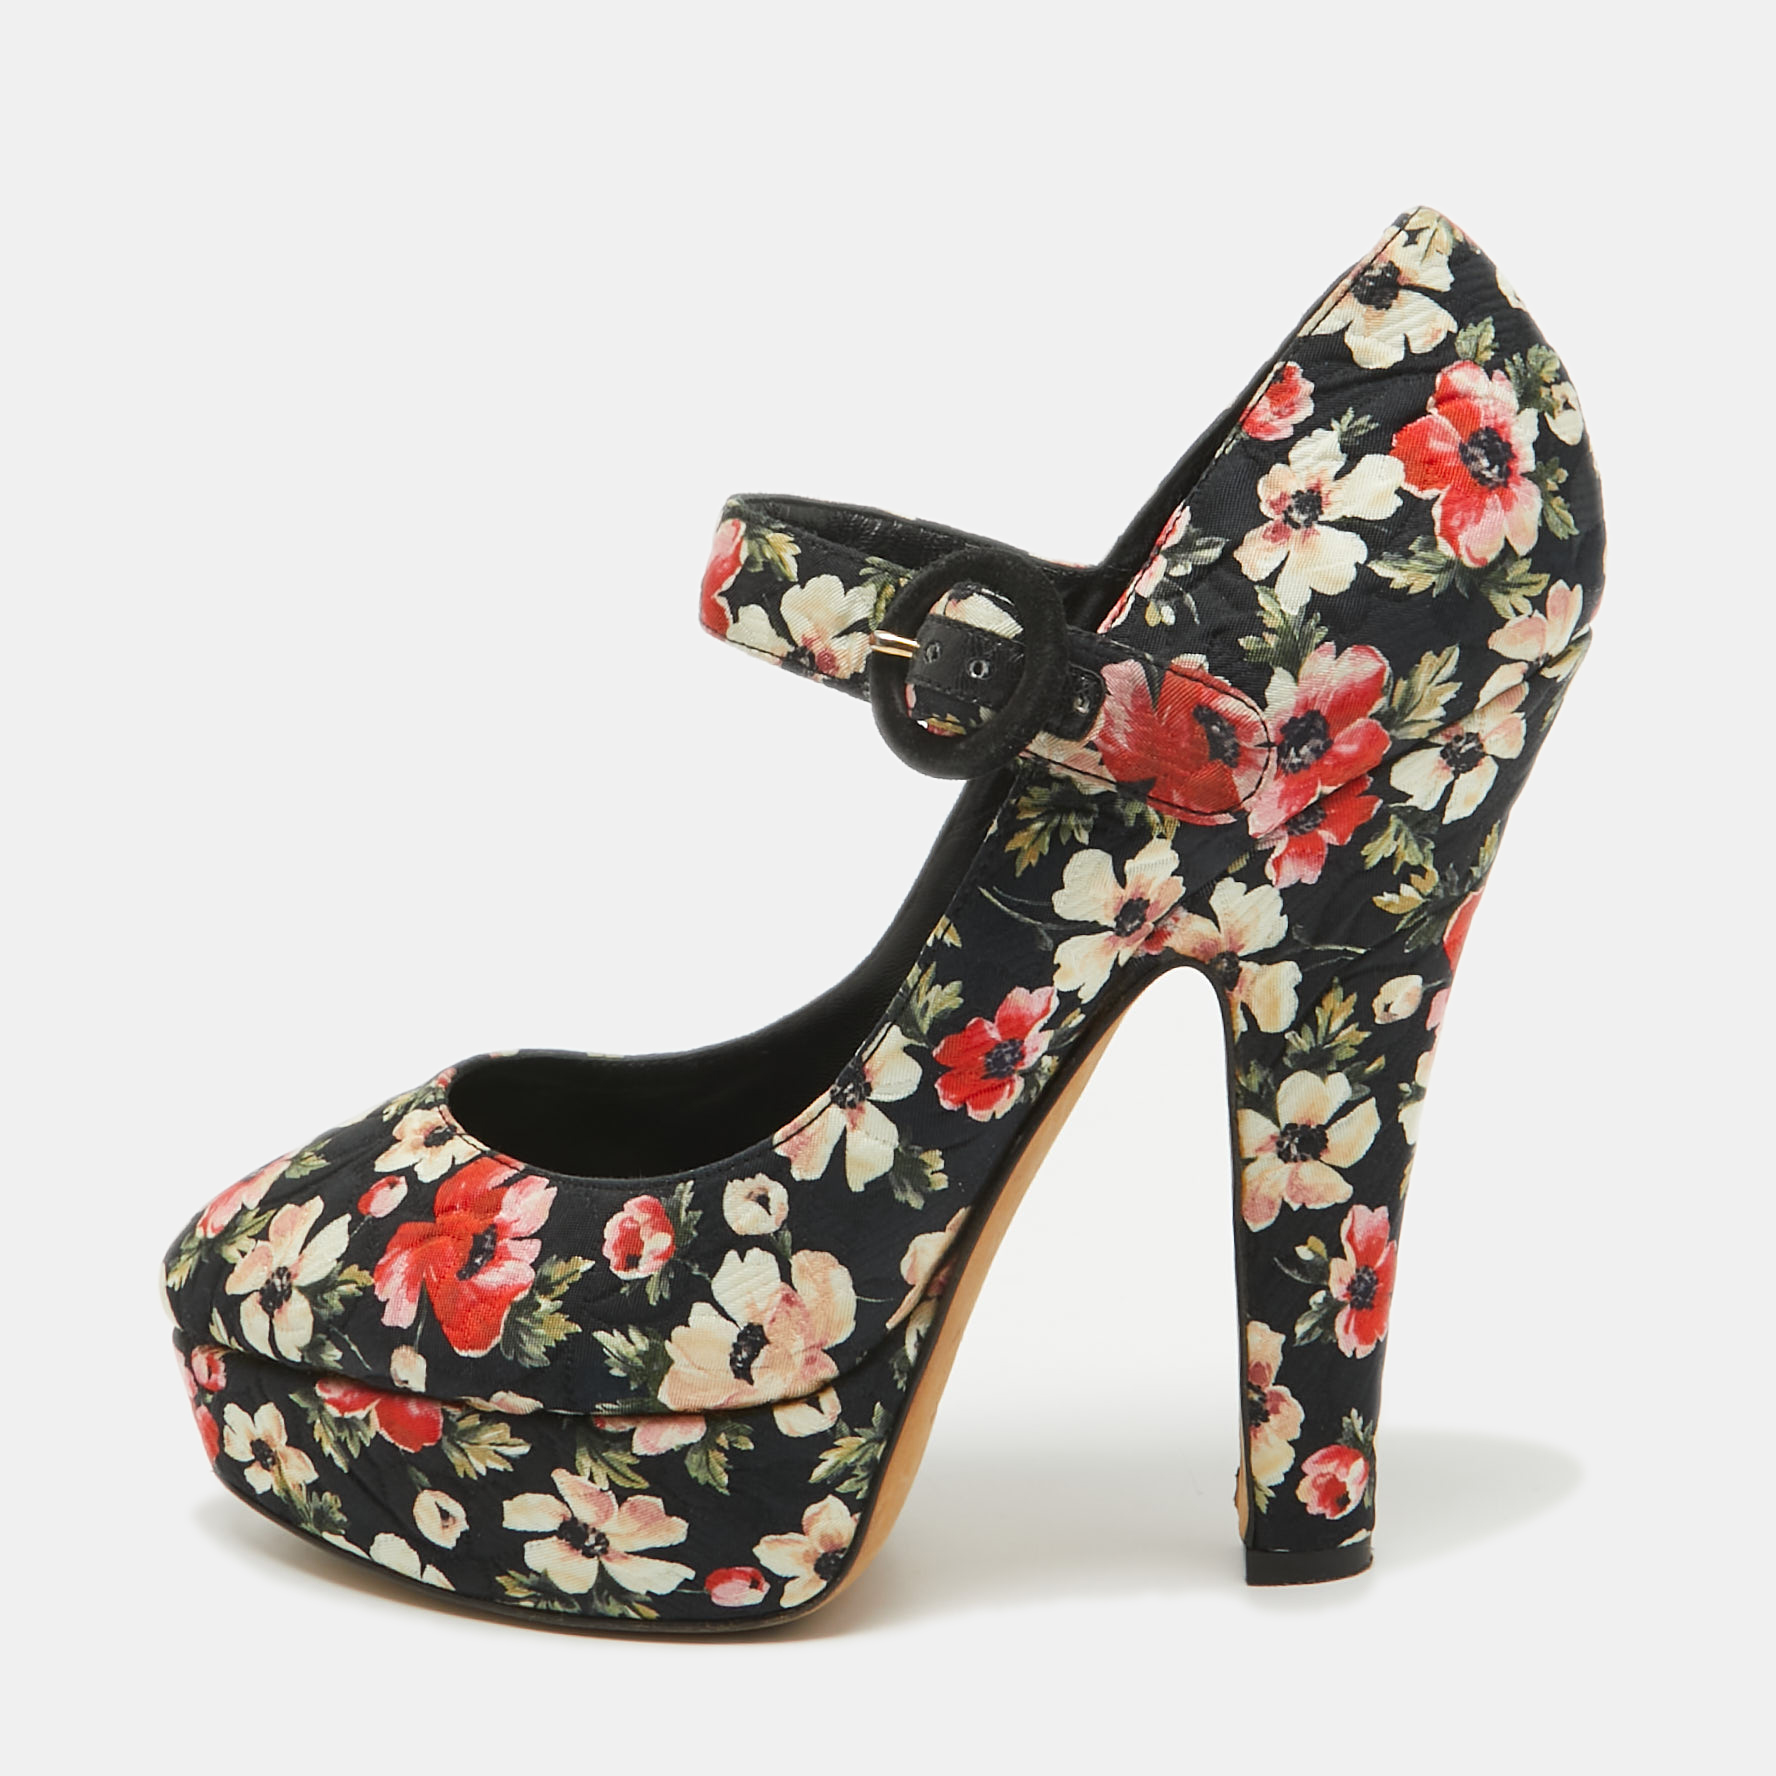 

Dolce & Gabbana Multicolor Floral Printed Fabric Mary Jane Platform Pumps Size